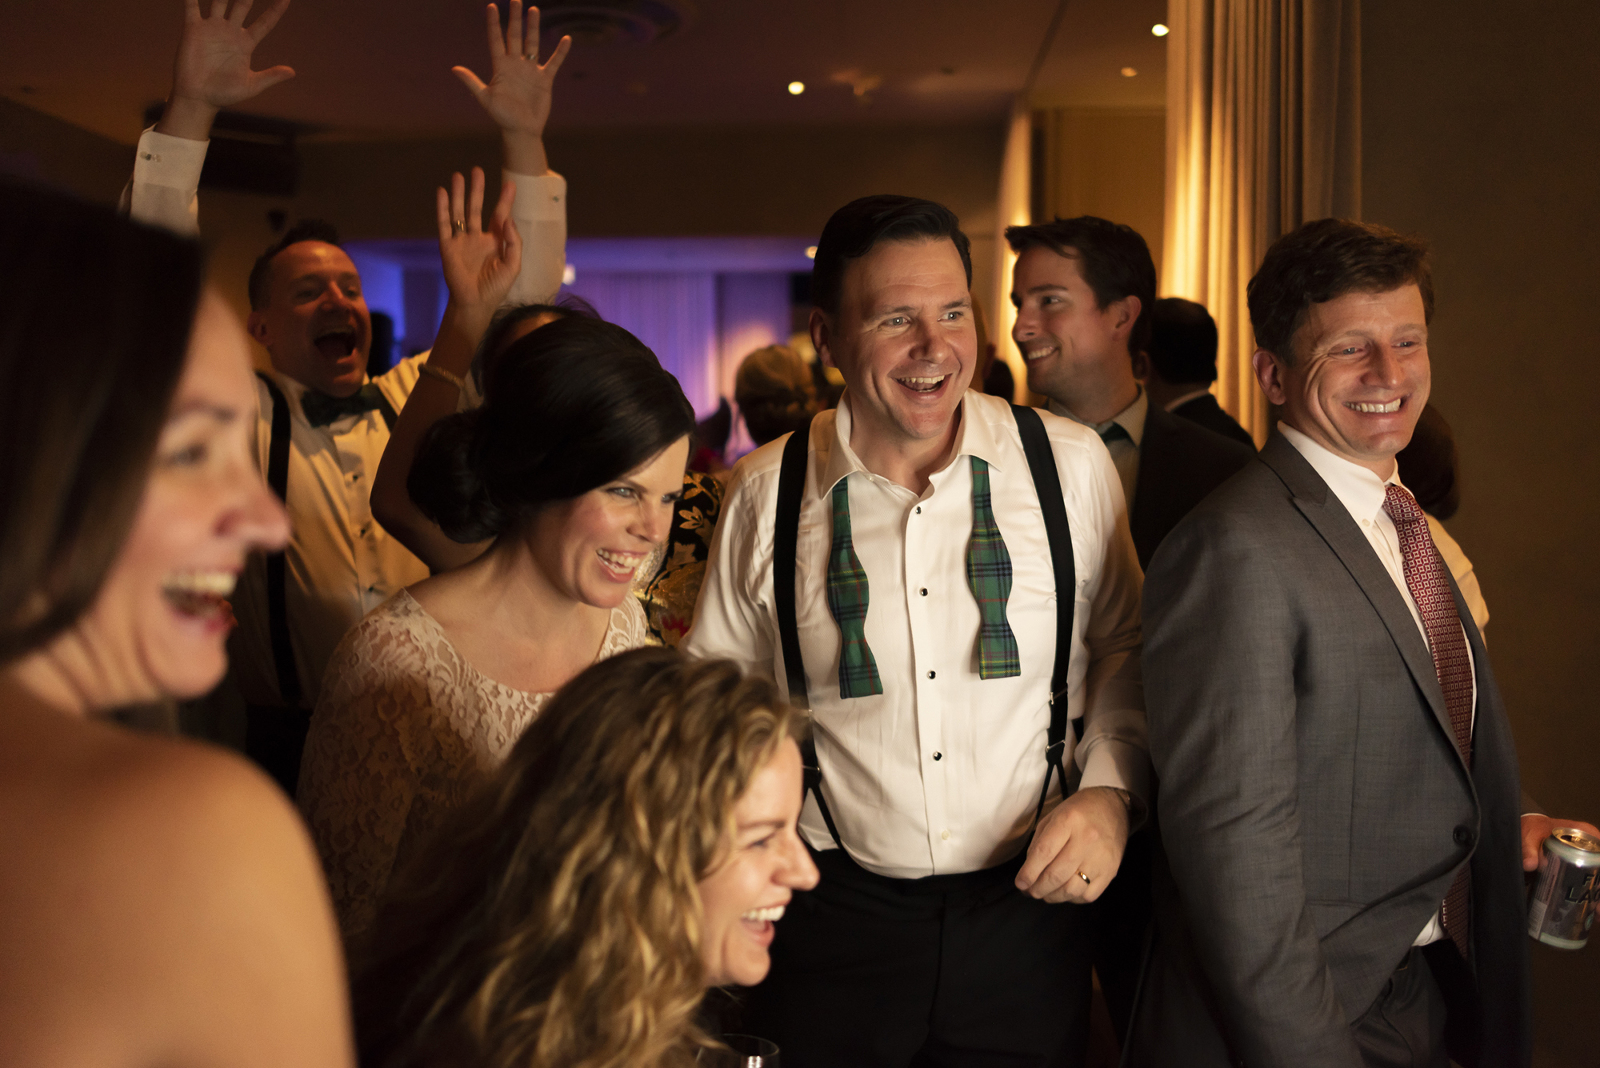 downtown chicago wedding reception photographed by Candice C. Cusic Photography